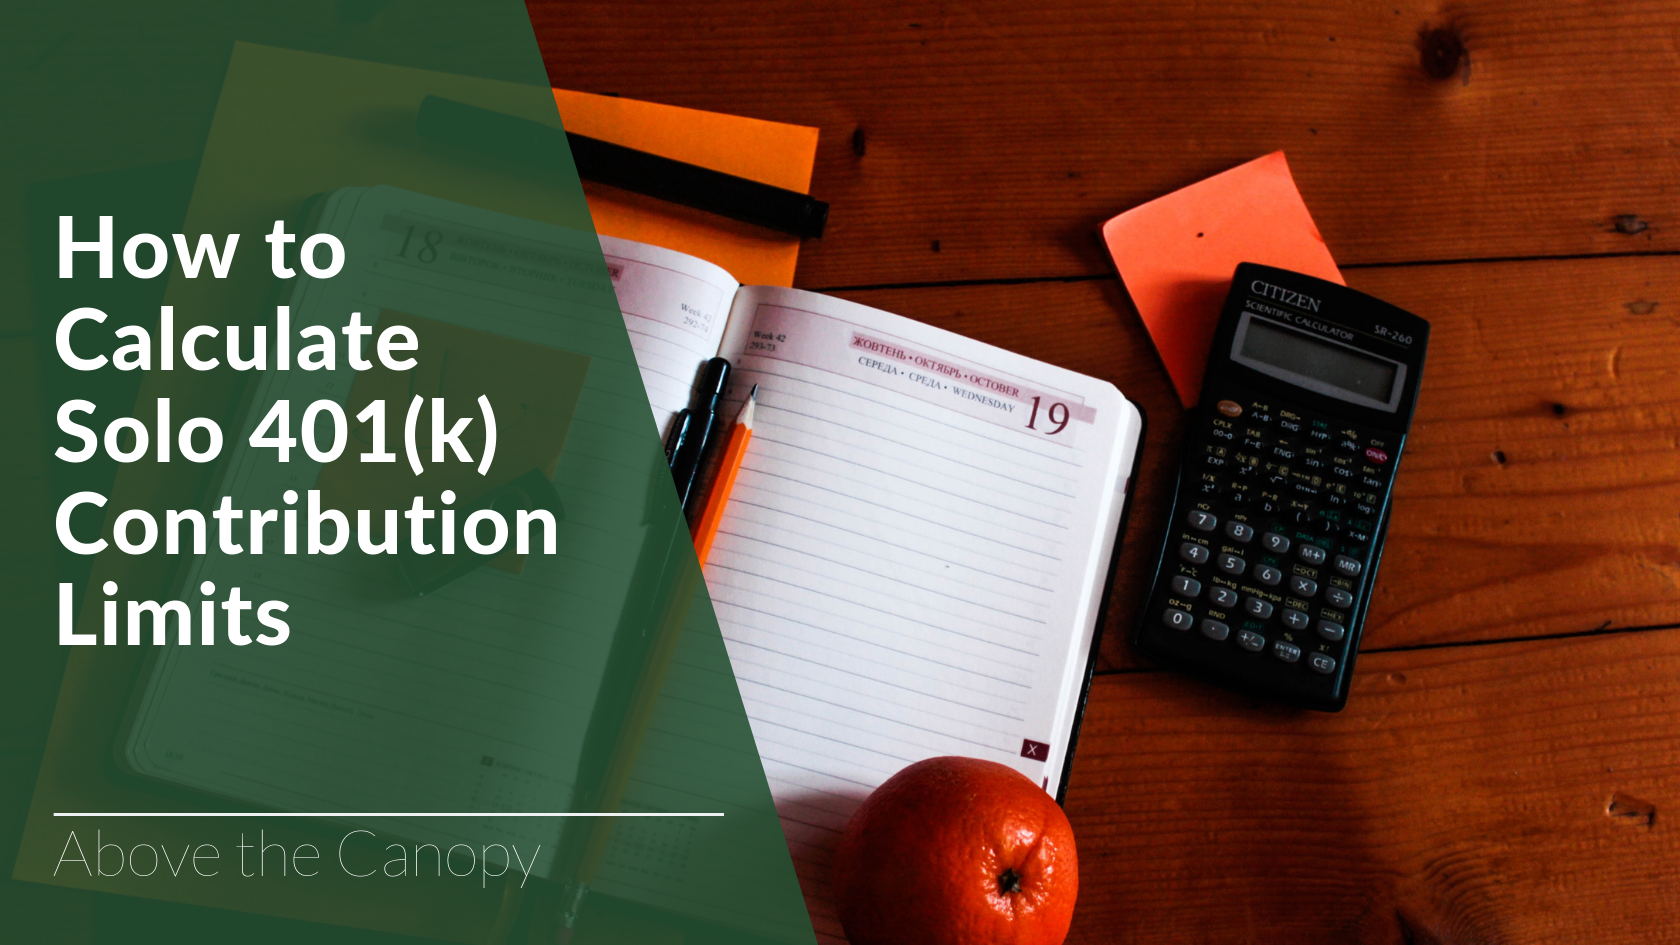 How to Calculate Solo 401k Contribution Limits